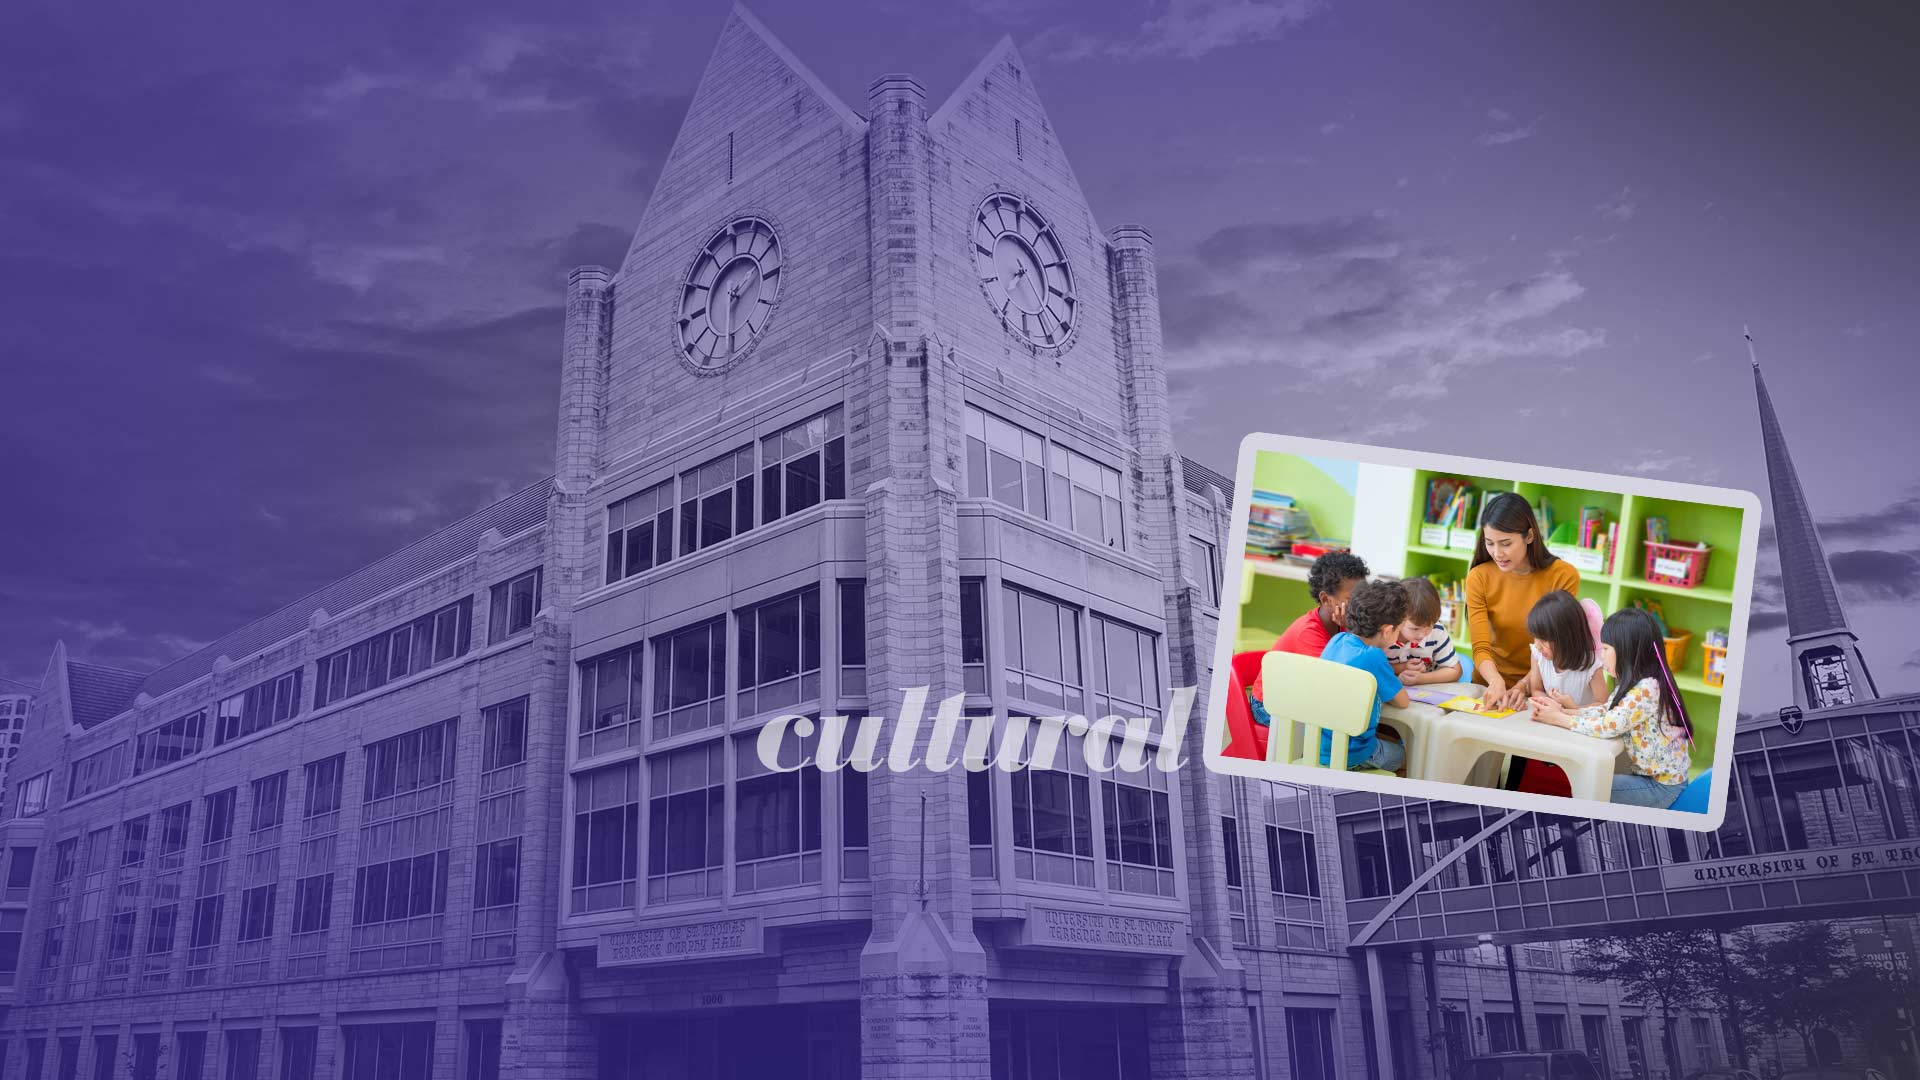 A teacher pointing to a piece of paper with children gathered around against background of a building photo tinted purple